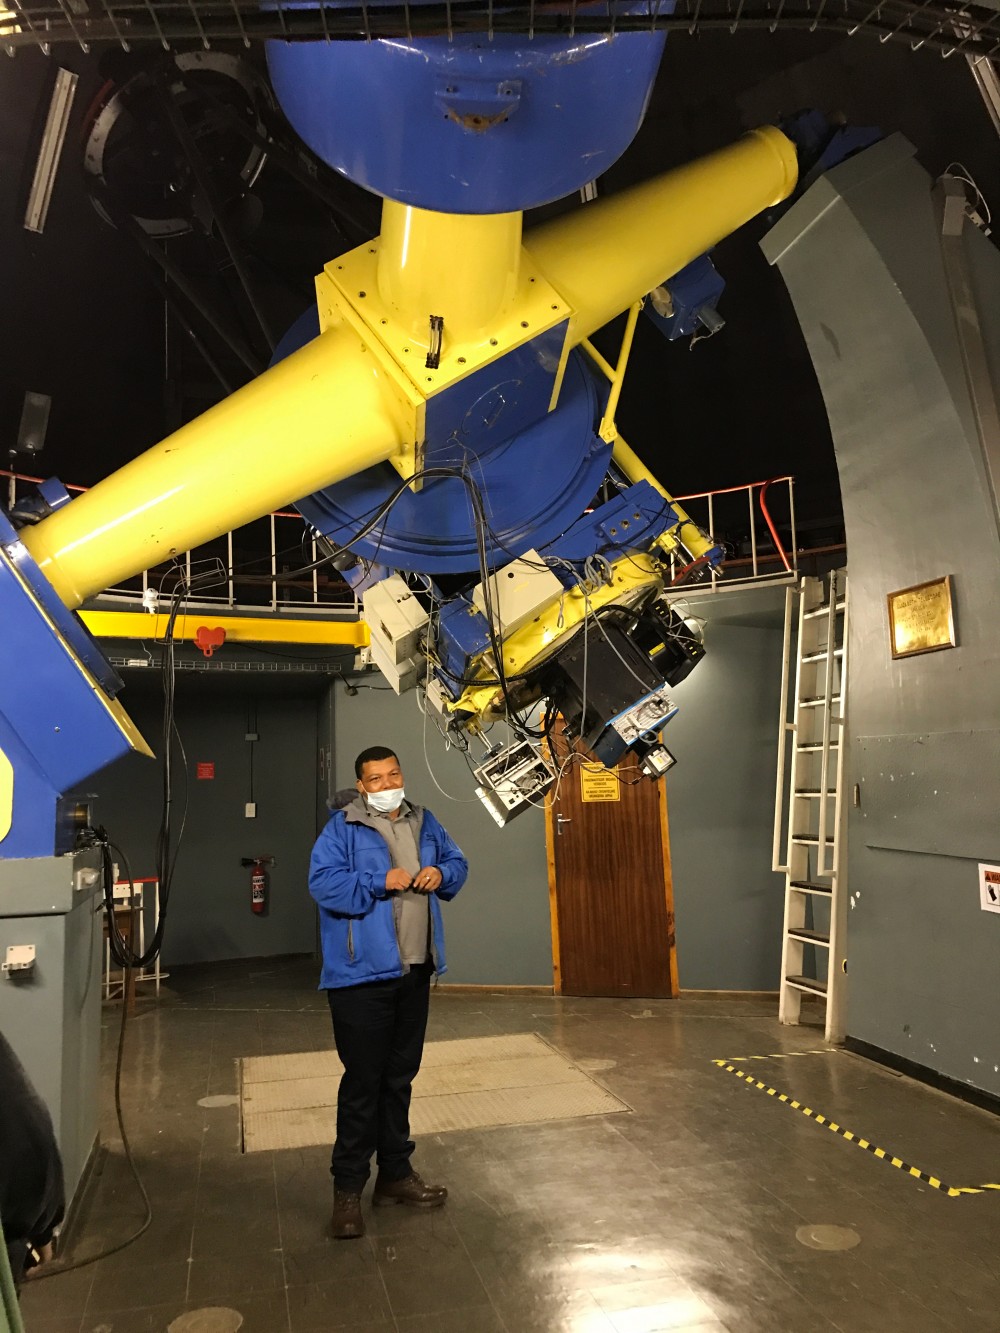 An astronomer at SAAO showing the 1.0 metre telescope